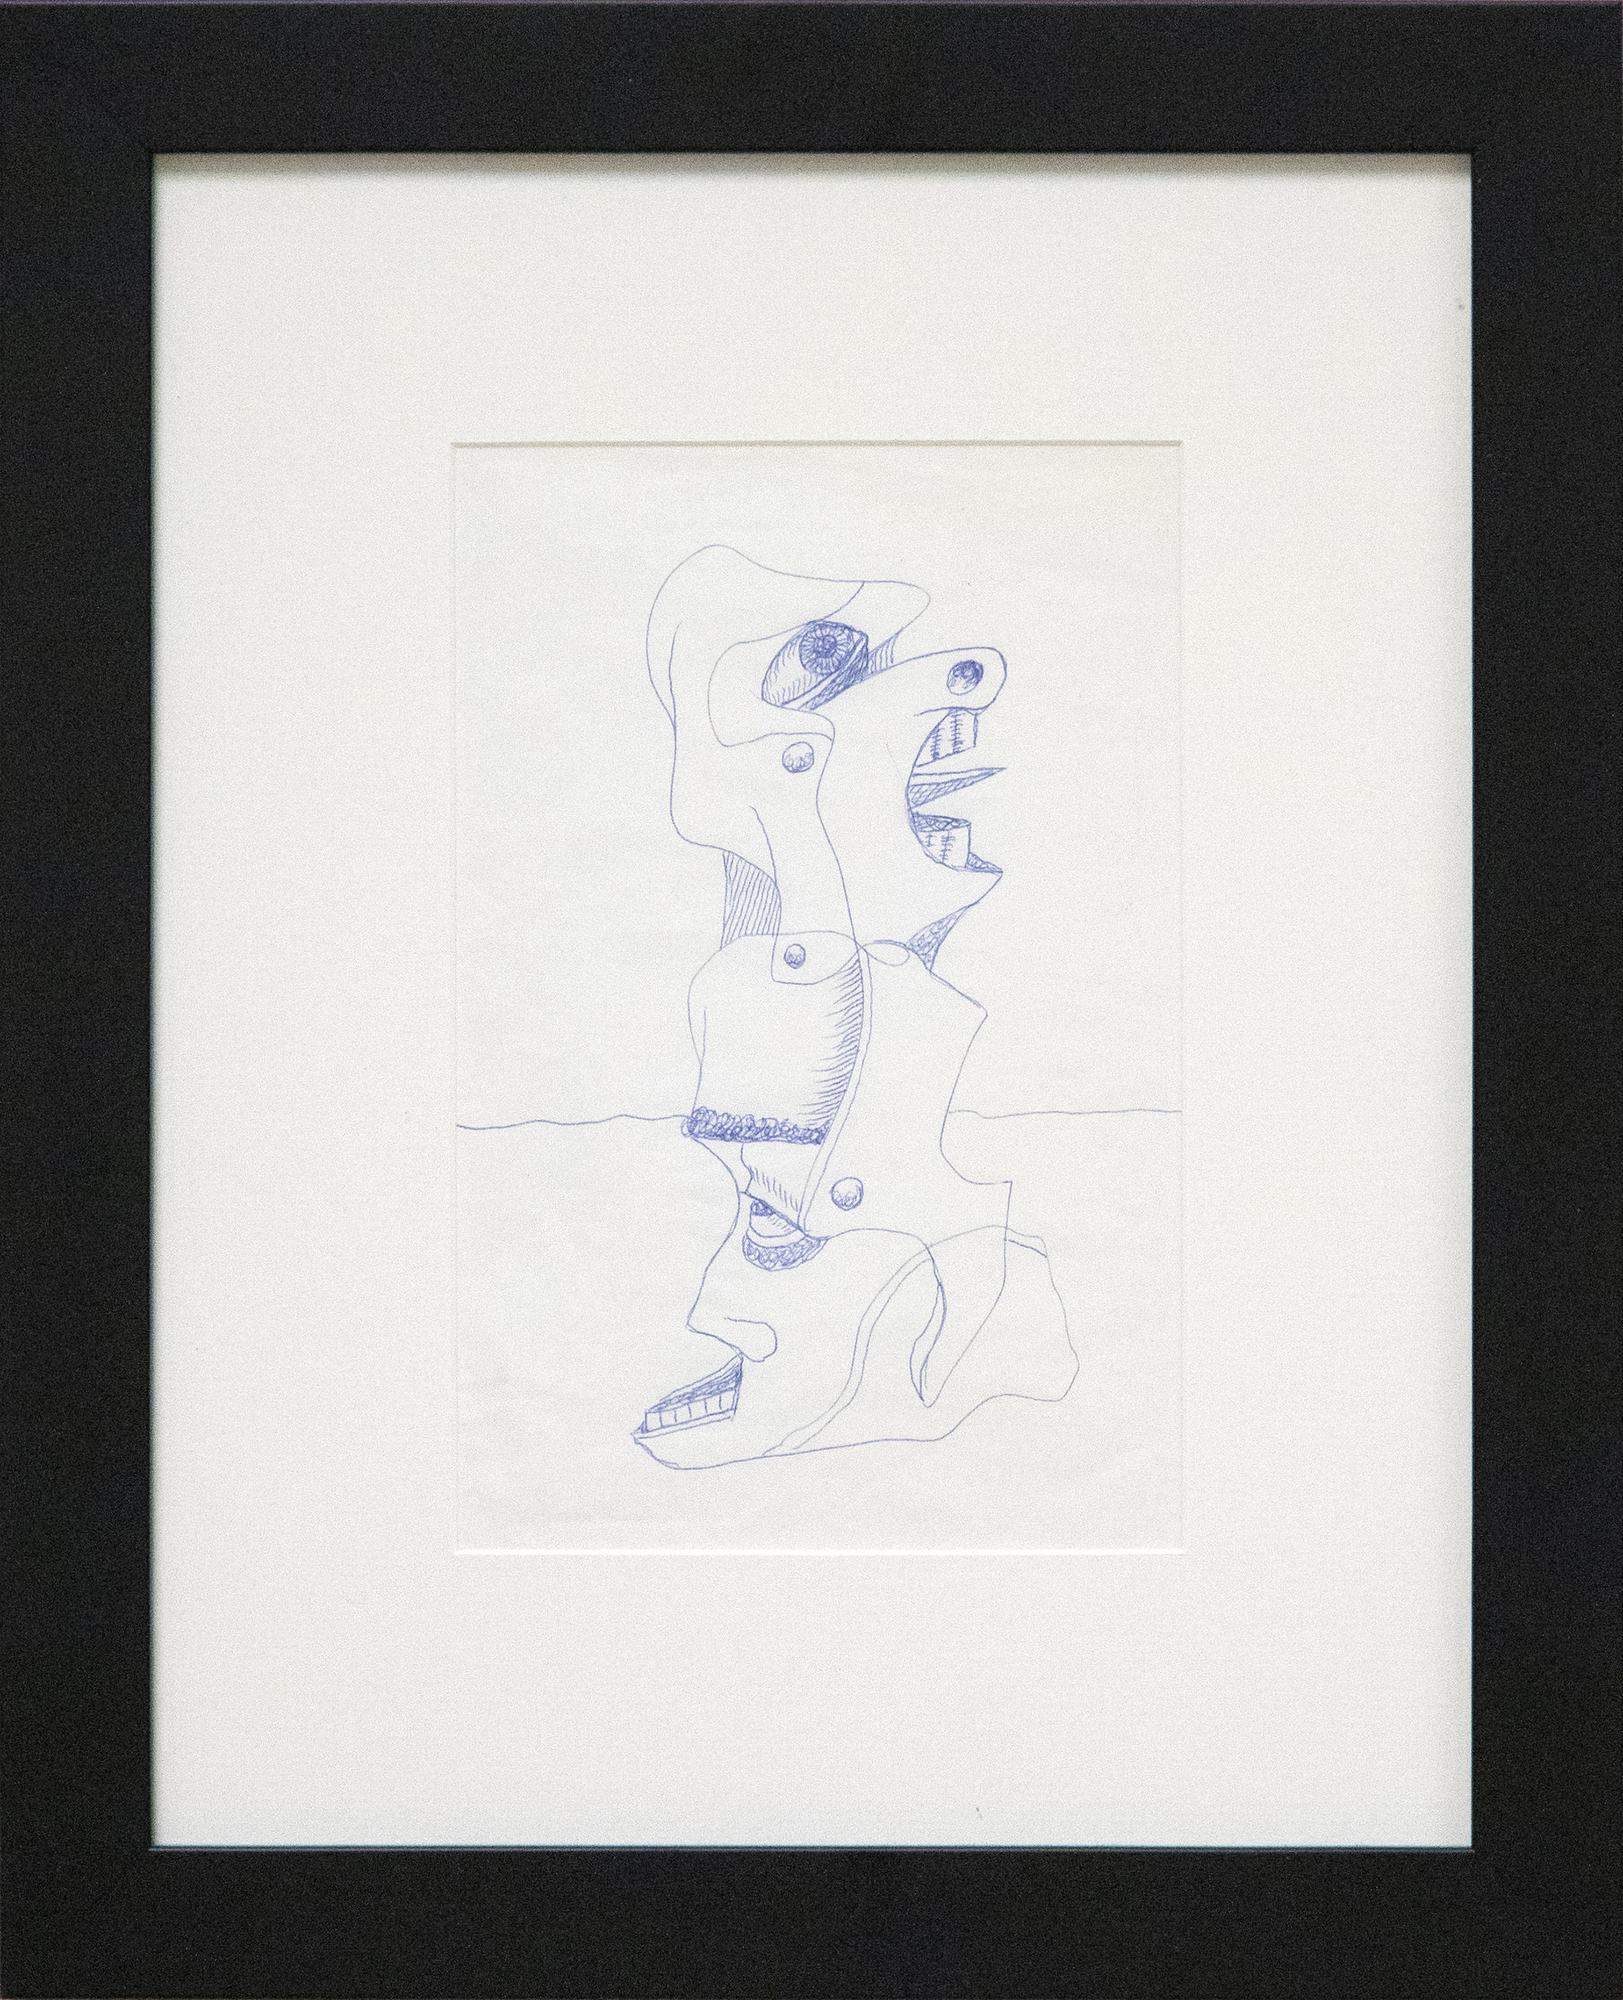 IRVING NORMAN - Untitled (Abstract Heads) - pen on paper - 8 7/8 x 6 in.